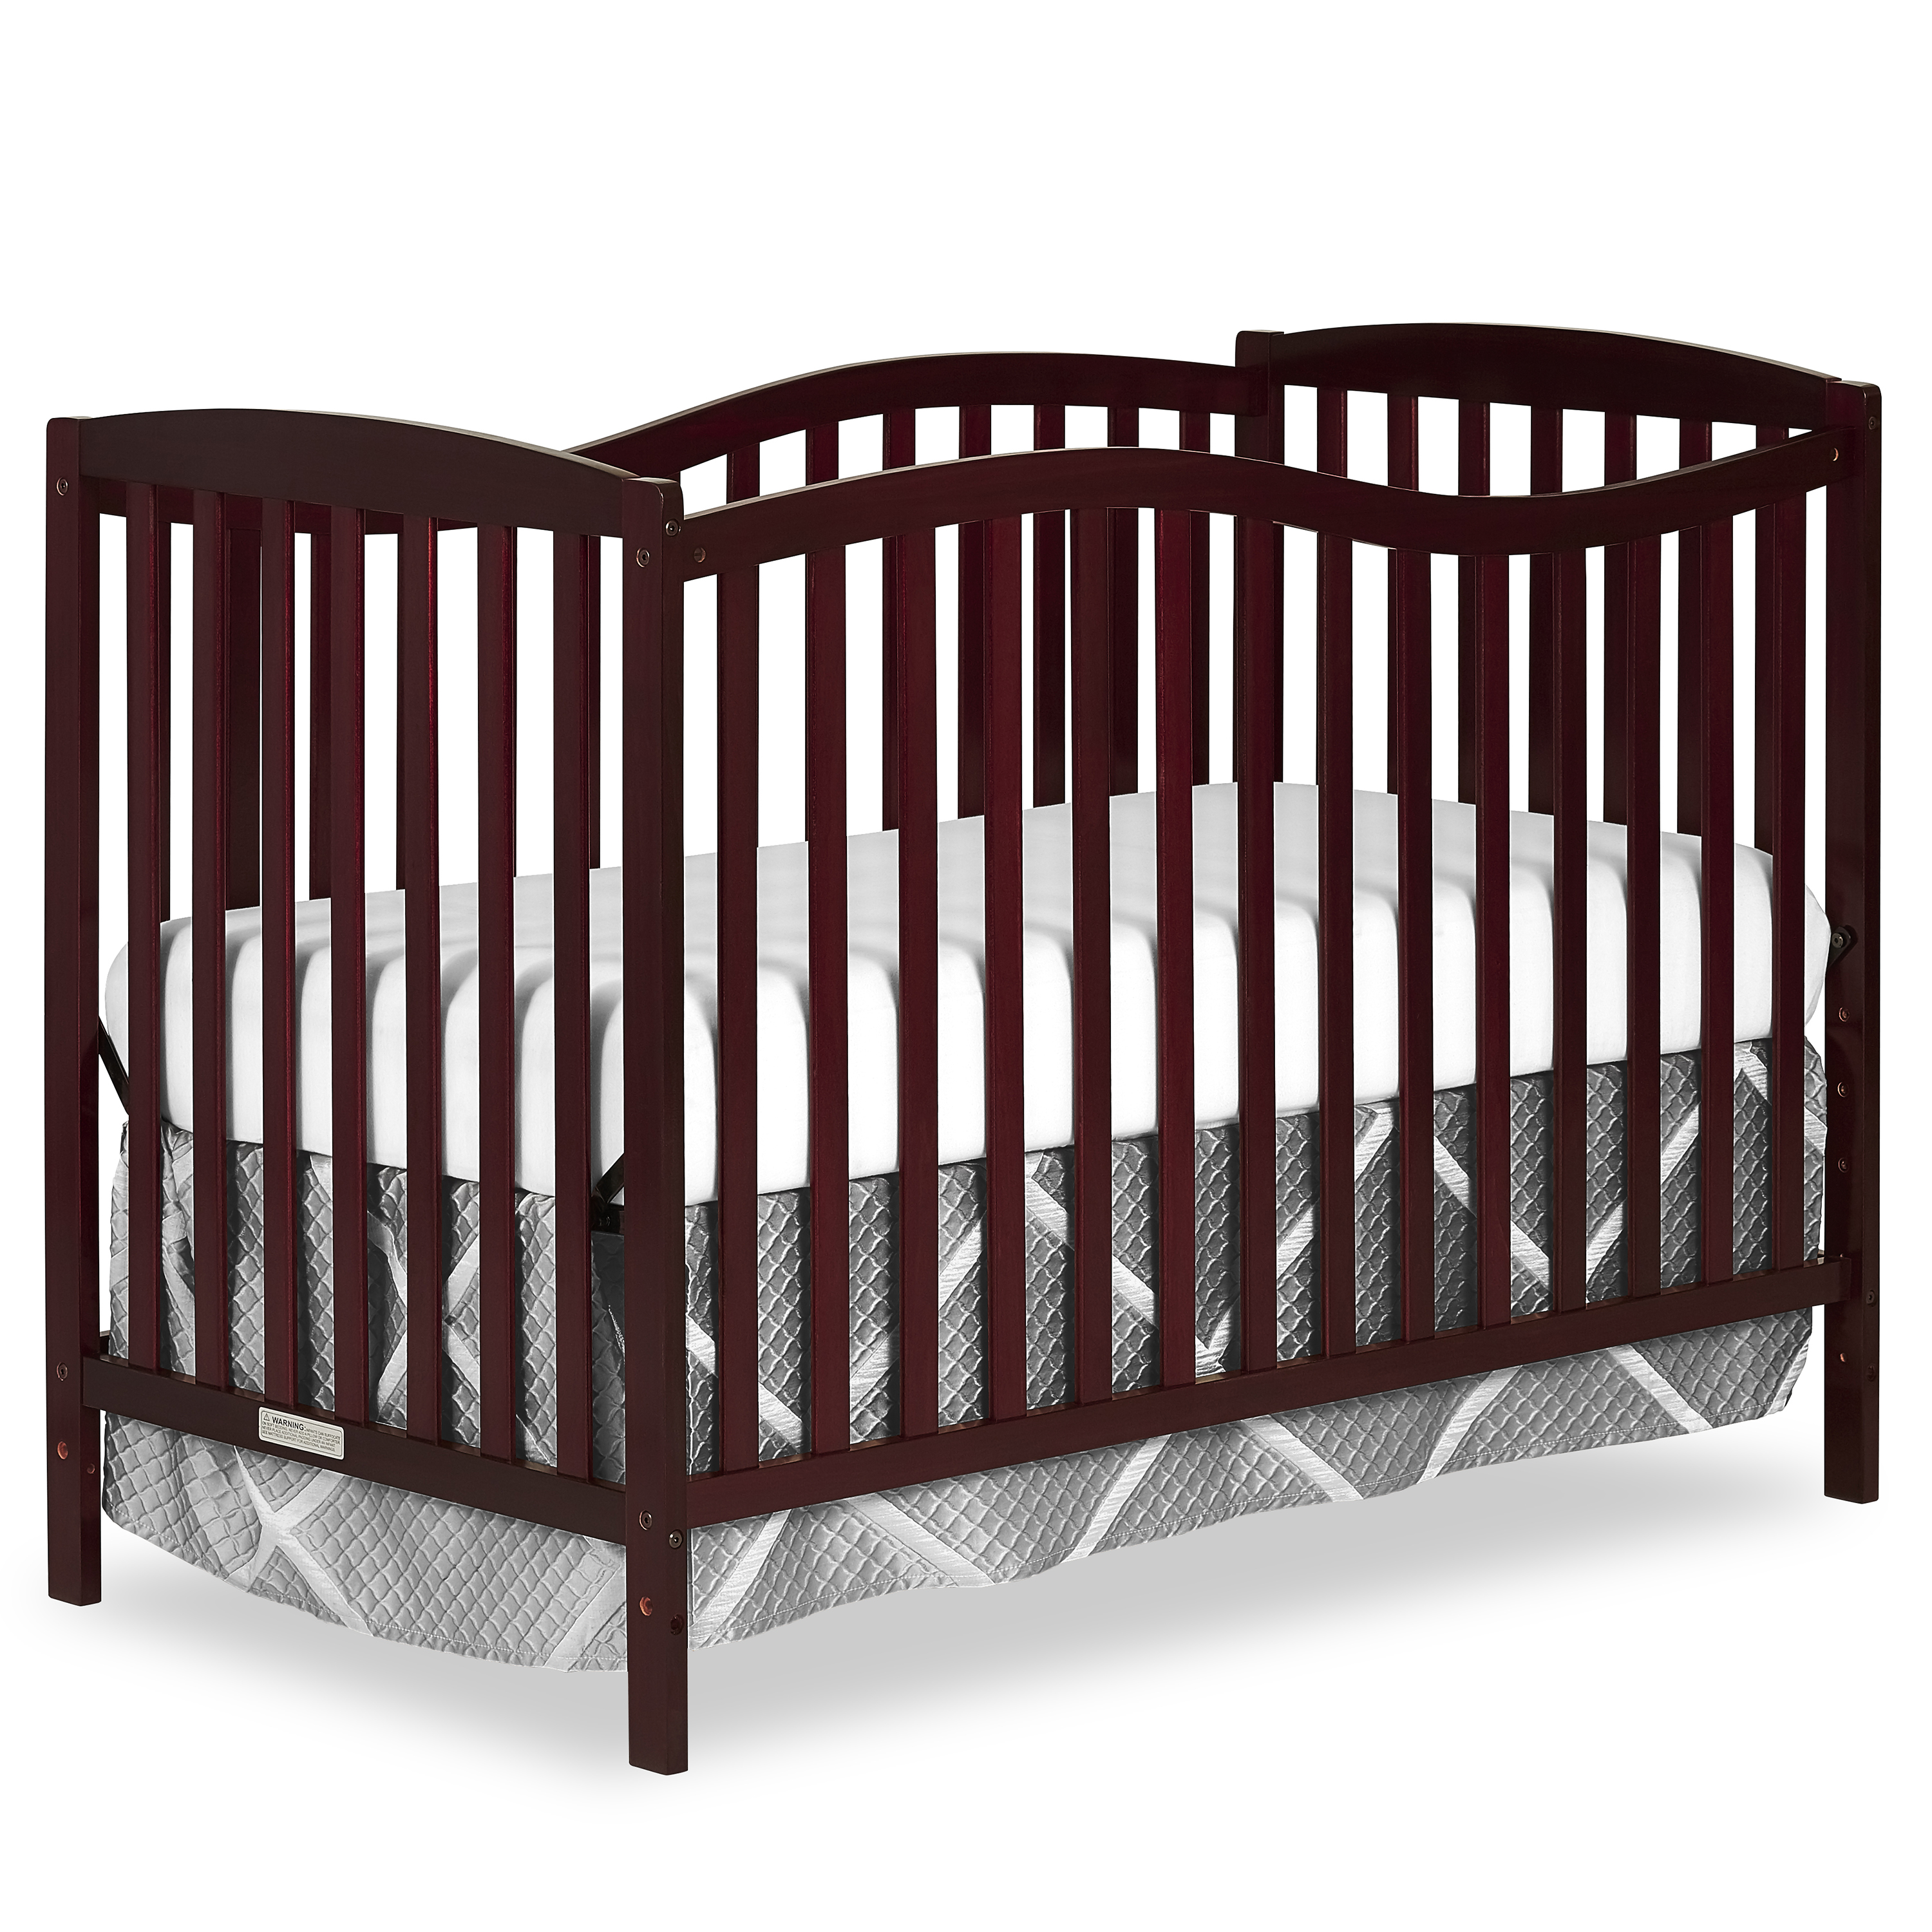 Dream On Me Chelsea 5-in-1 Convertible Crib, JPMA Certified, Cherry - image 1 of 13